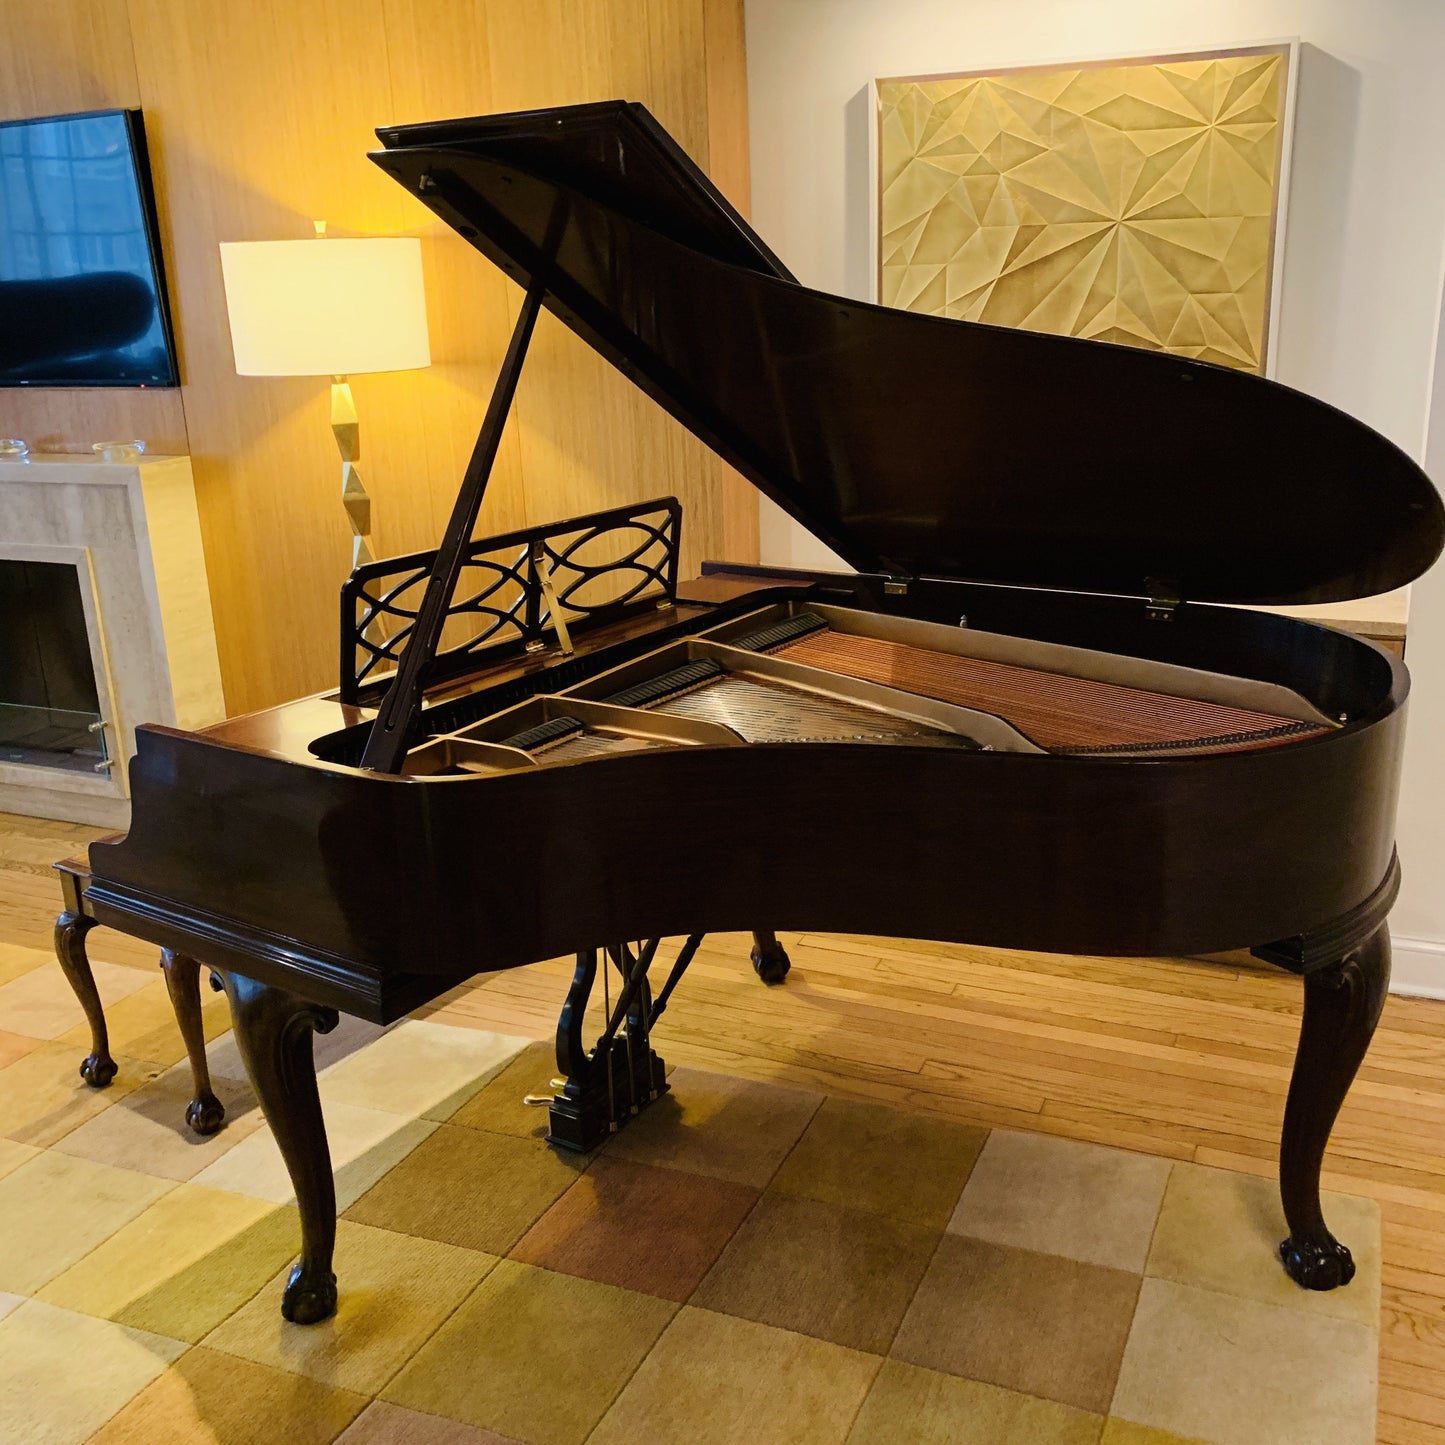 Steinway Model M Piano | Limited "Heirloom" Edition Sold at Steinway NYC Showroom in 2005